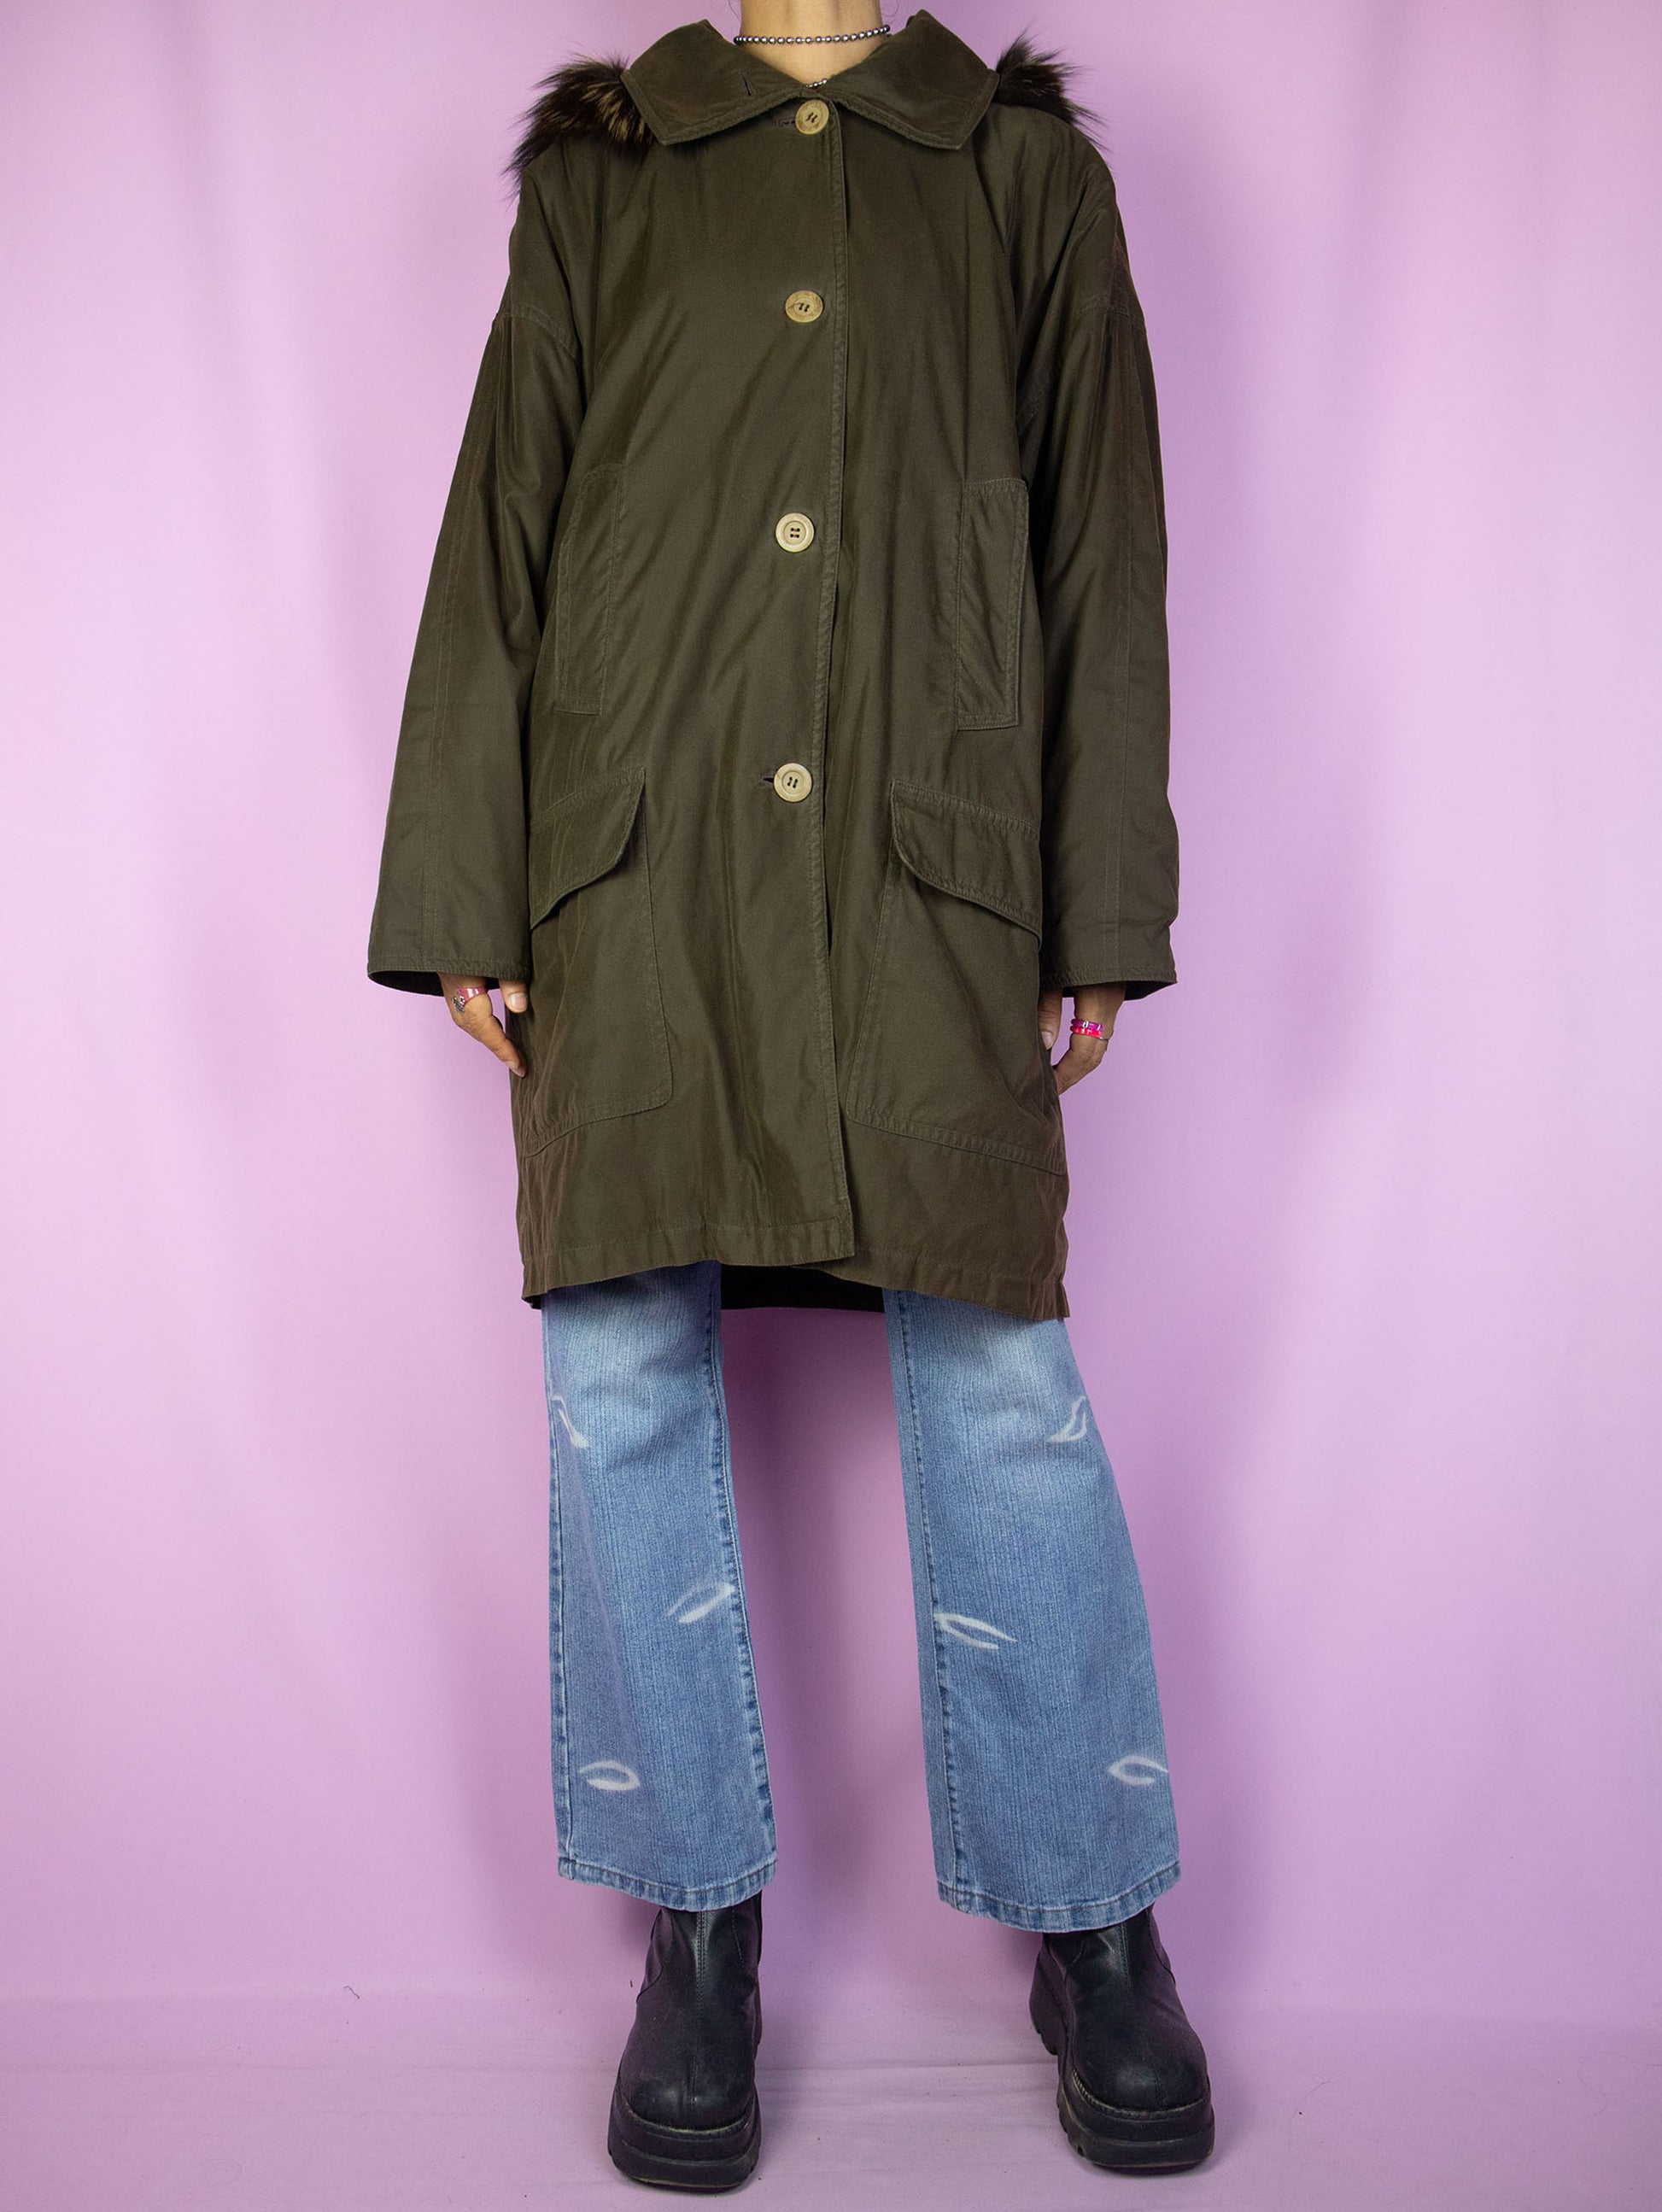 The Vintage 90's Dark Green Parka Jacket is a dark greenish-brown coat with pockets, buttons, and a removable hood with fur. A classic retro grunge winter coat from the 1990s.